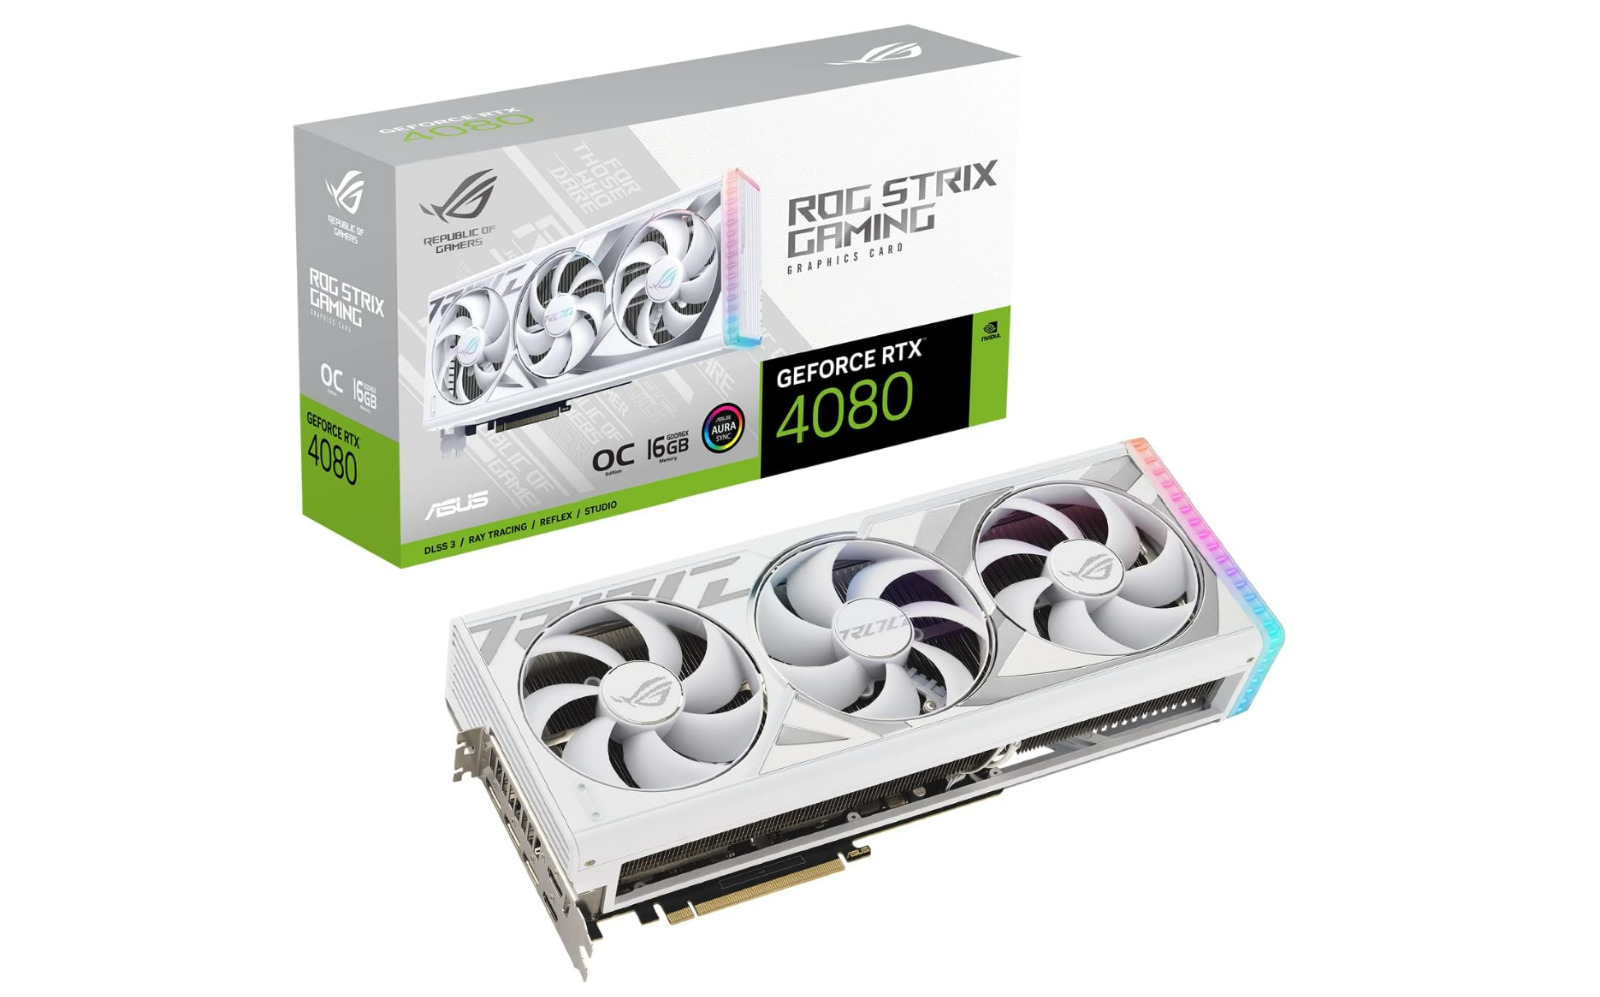 ASUS ROG Strix GeForce RTX 4080 White OC Edition Gaming Graphics Card